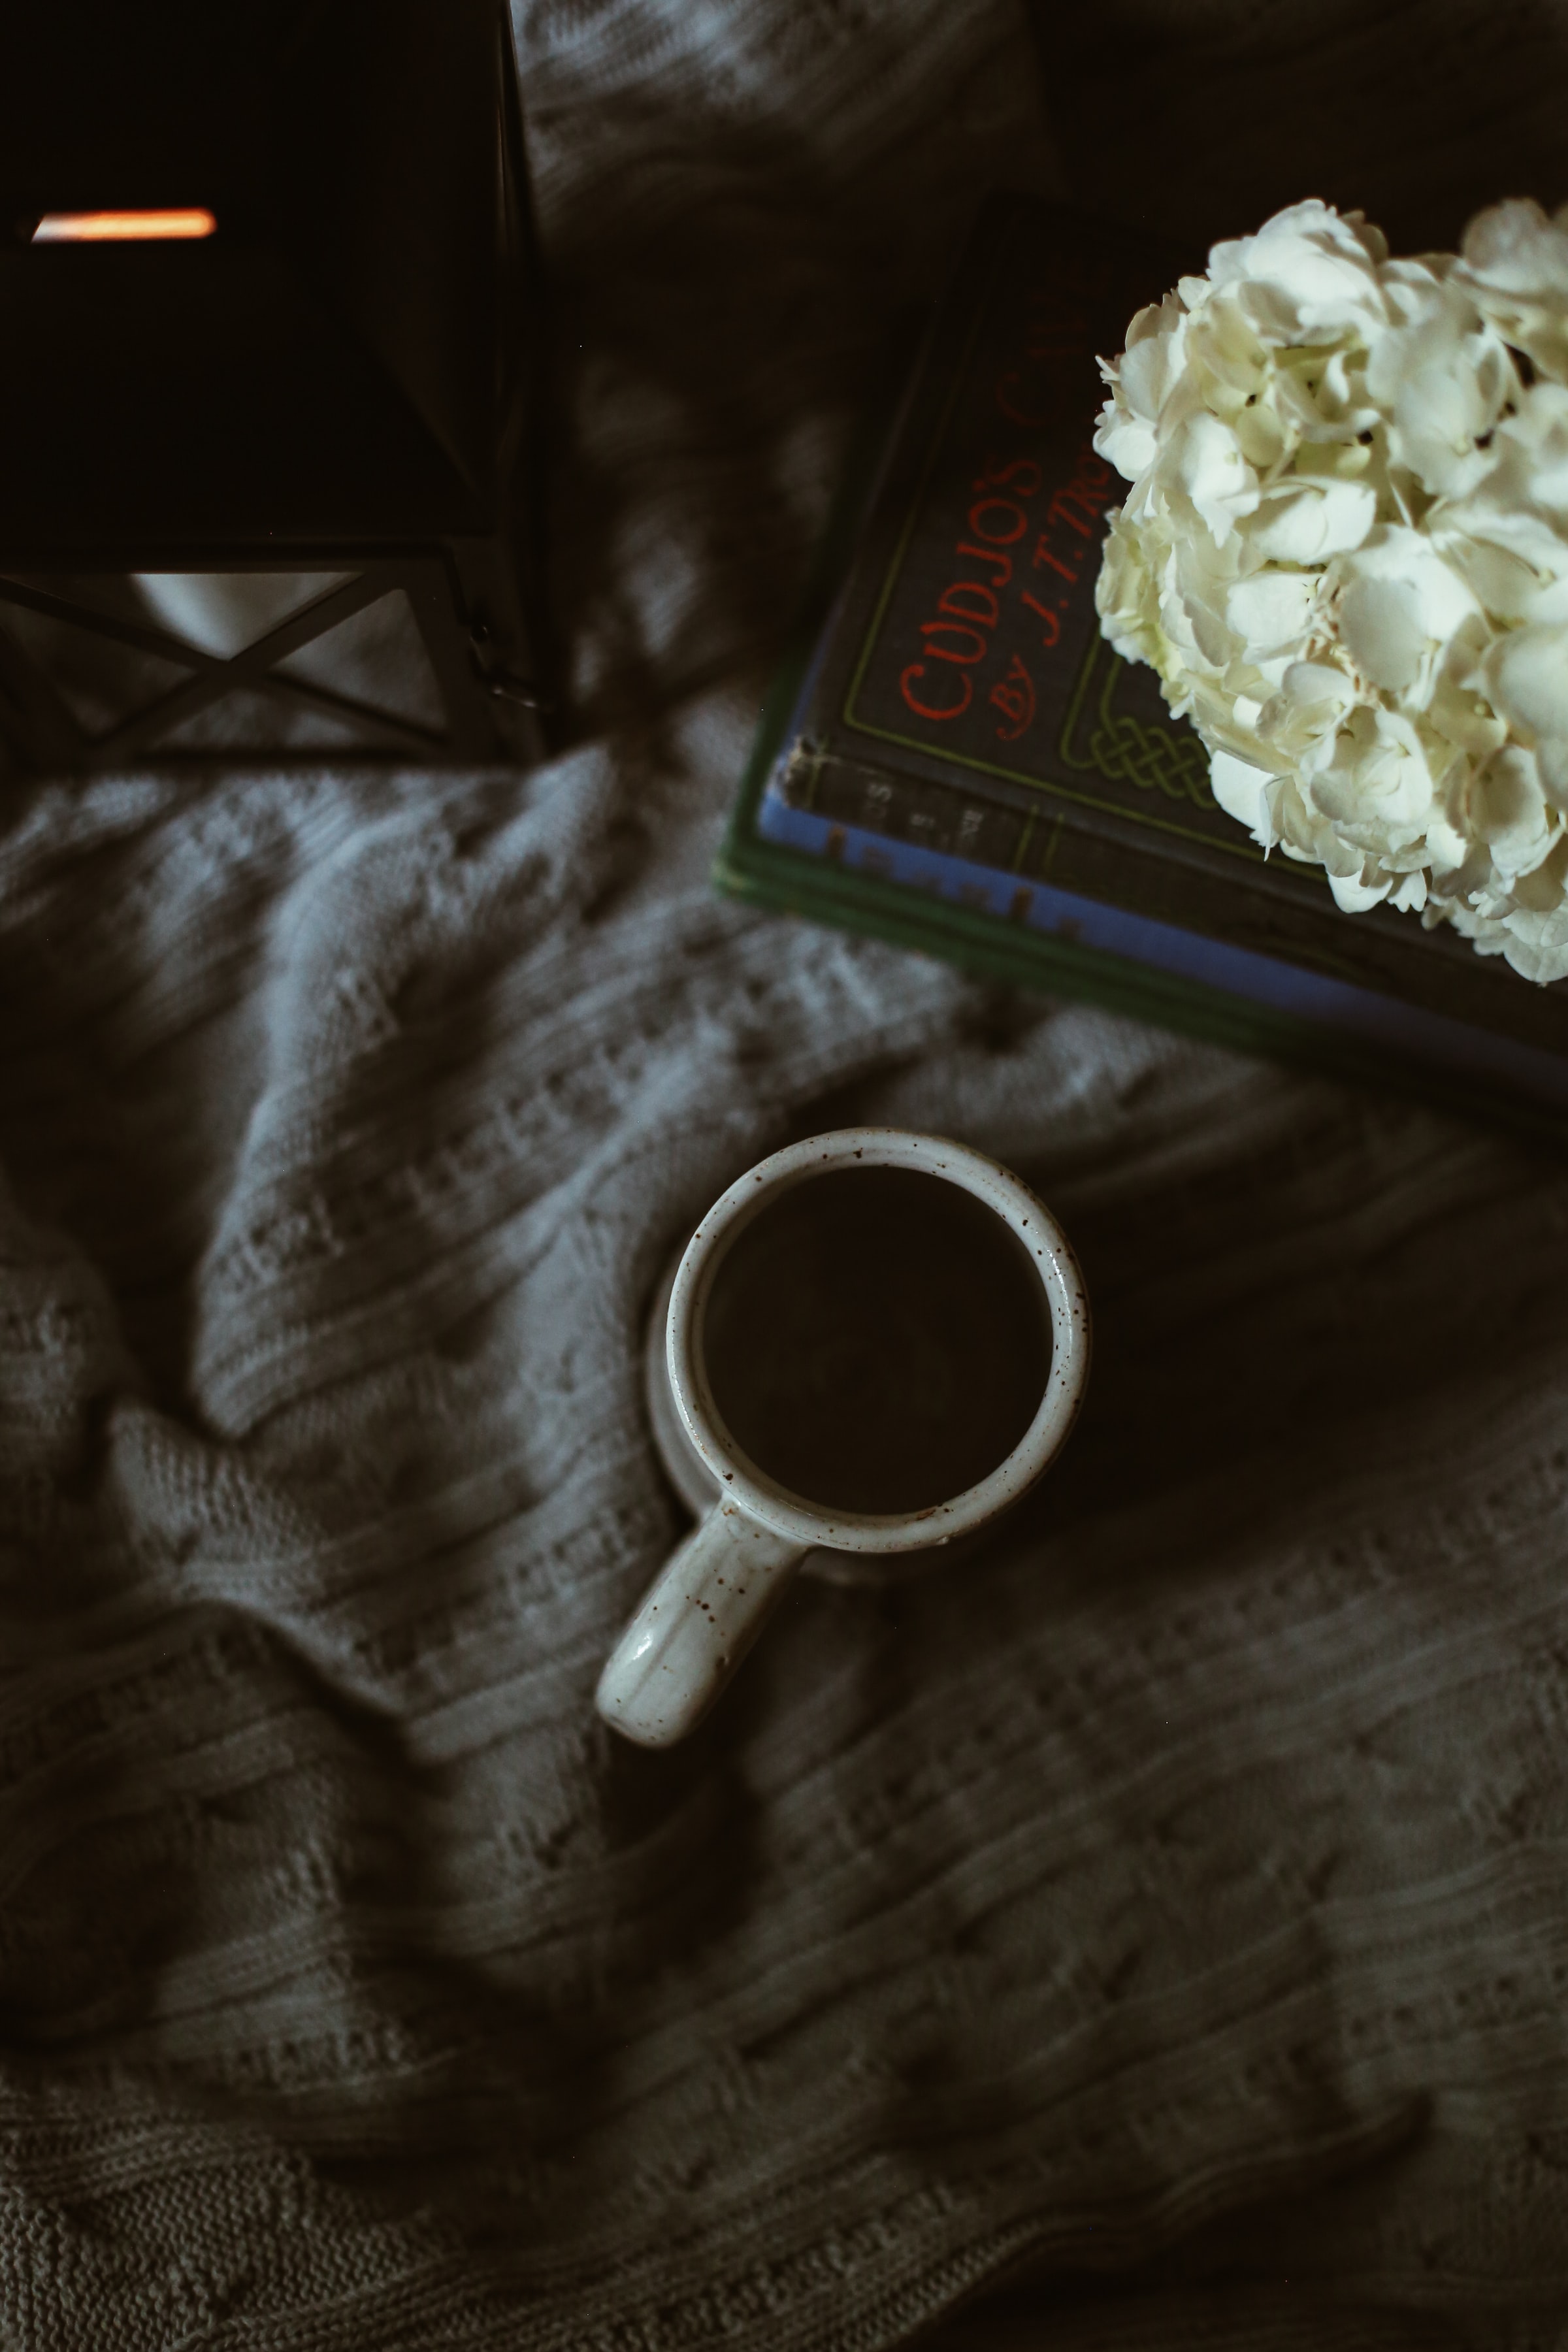 flowers, coffee, miscellanea, miscellaneous, cup, cloth, book Panoramic Wallpaper